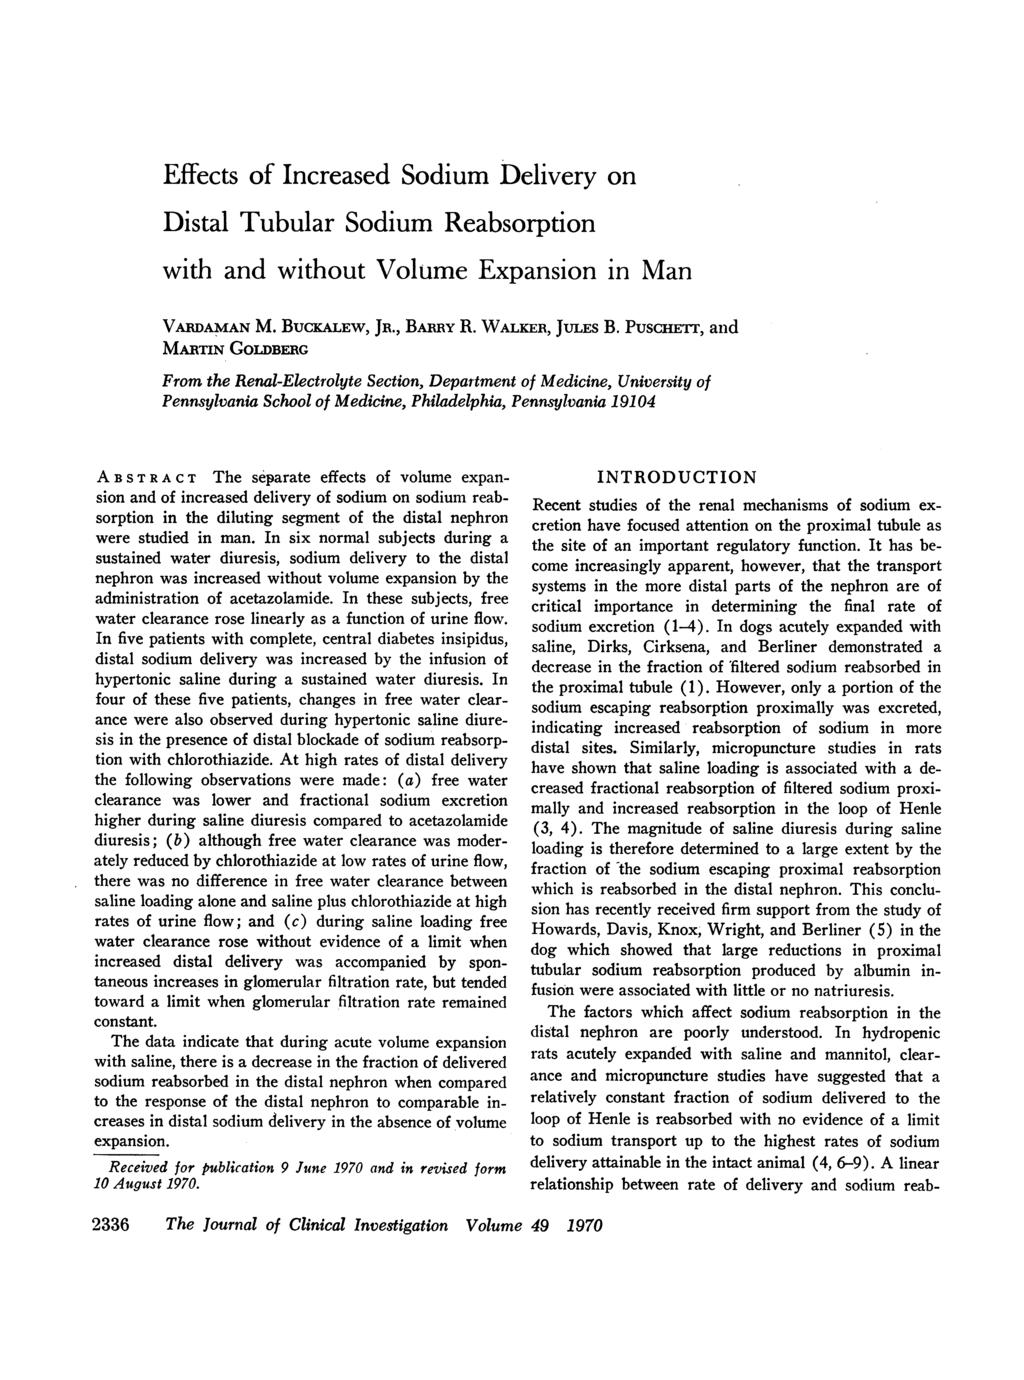 Effects of Increased Sodium Delivery on Distal Tubular Sodium Reabsorption with and without Volume Expansion in Man VARDAMAN M. BUCKALEW, JR., BAimy R. WALKER, JULES B.